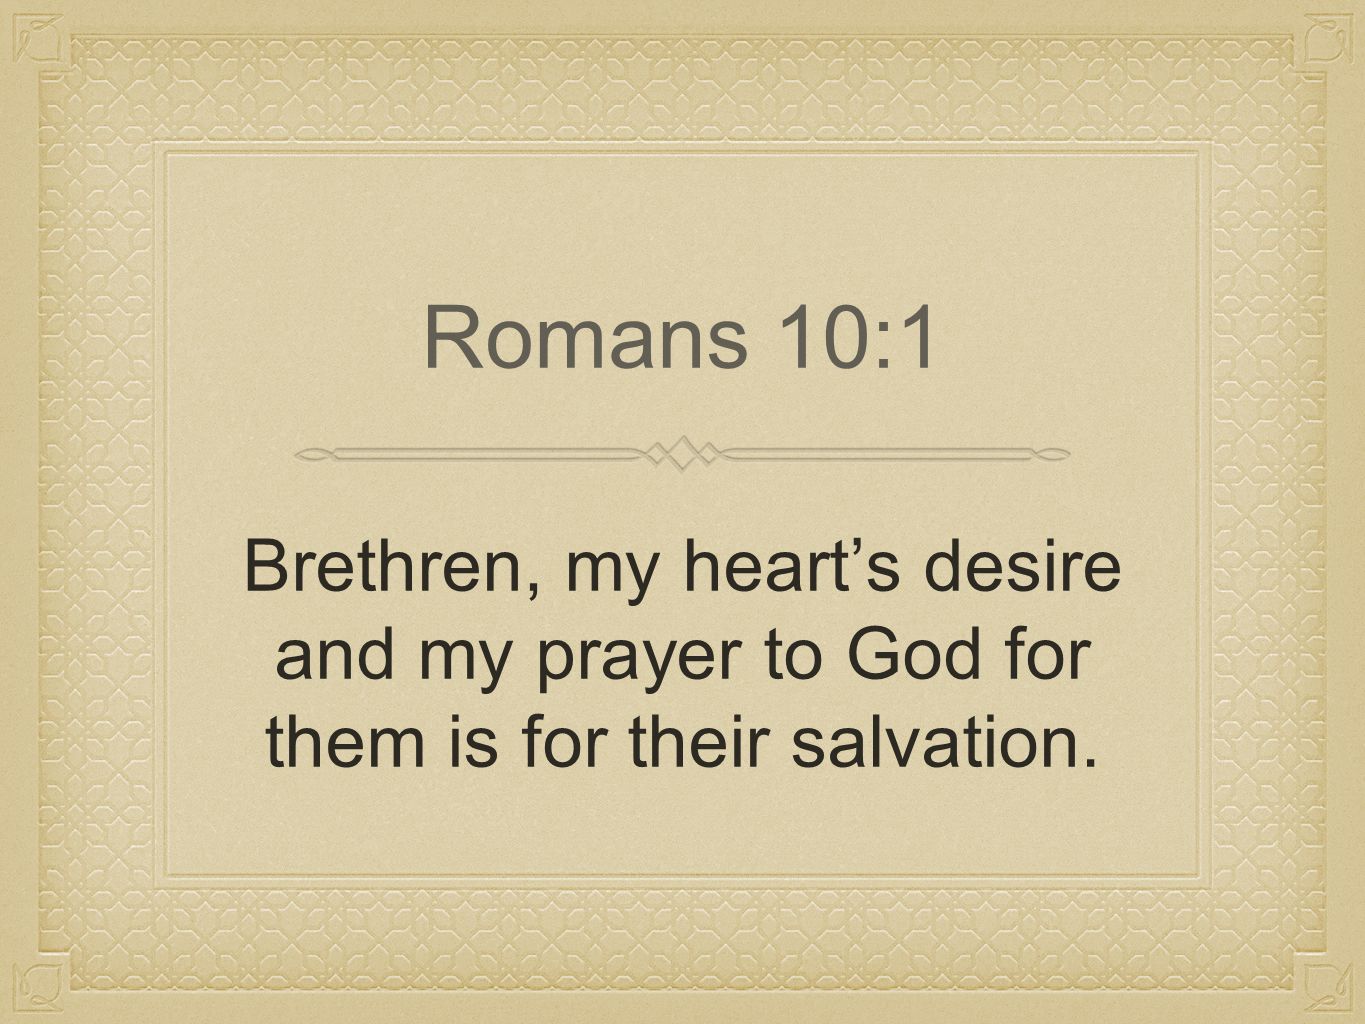 Brethren, my heart’s desire and my prayer to God for them is for their salvation. Romans 10:1